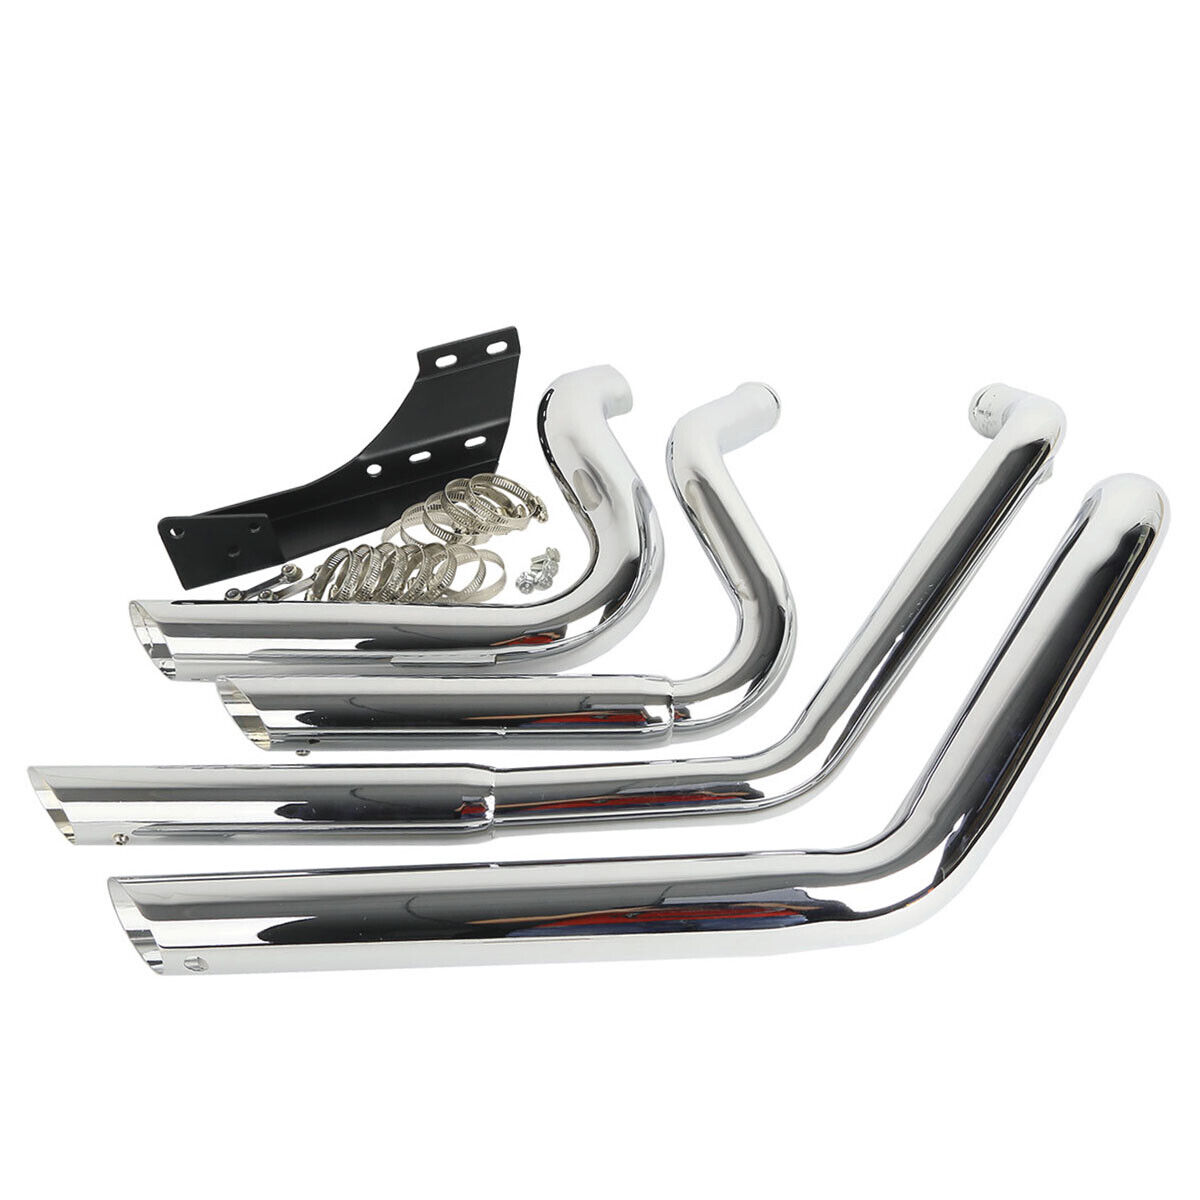 Staggered Shortshot Exhaust Pipes Fit For Harley Sportster Iron 883 XL883N 04-13